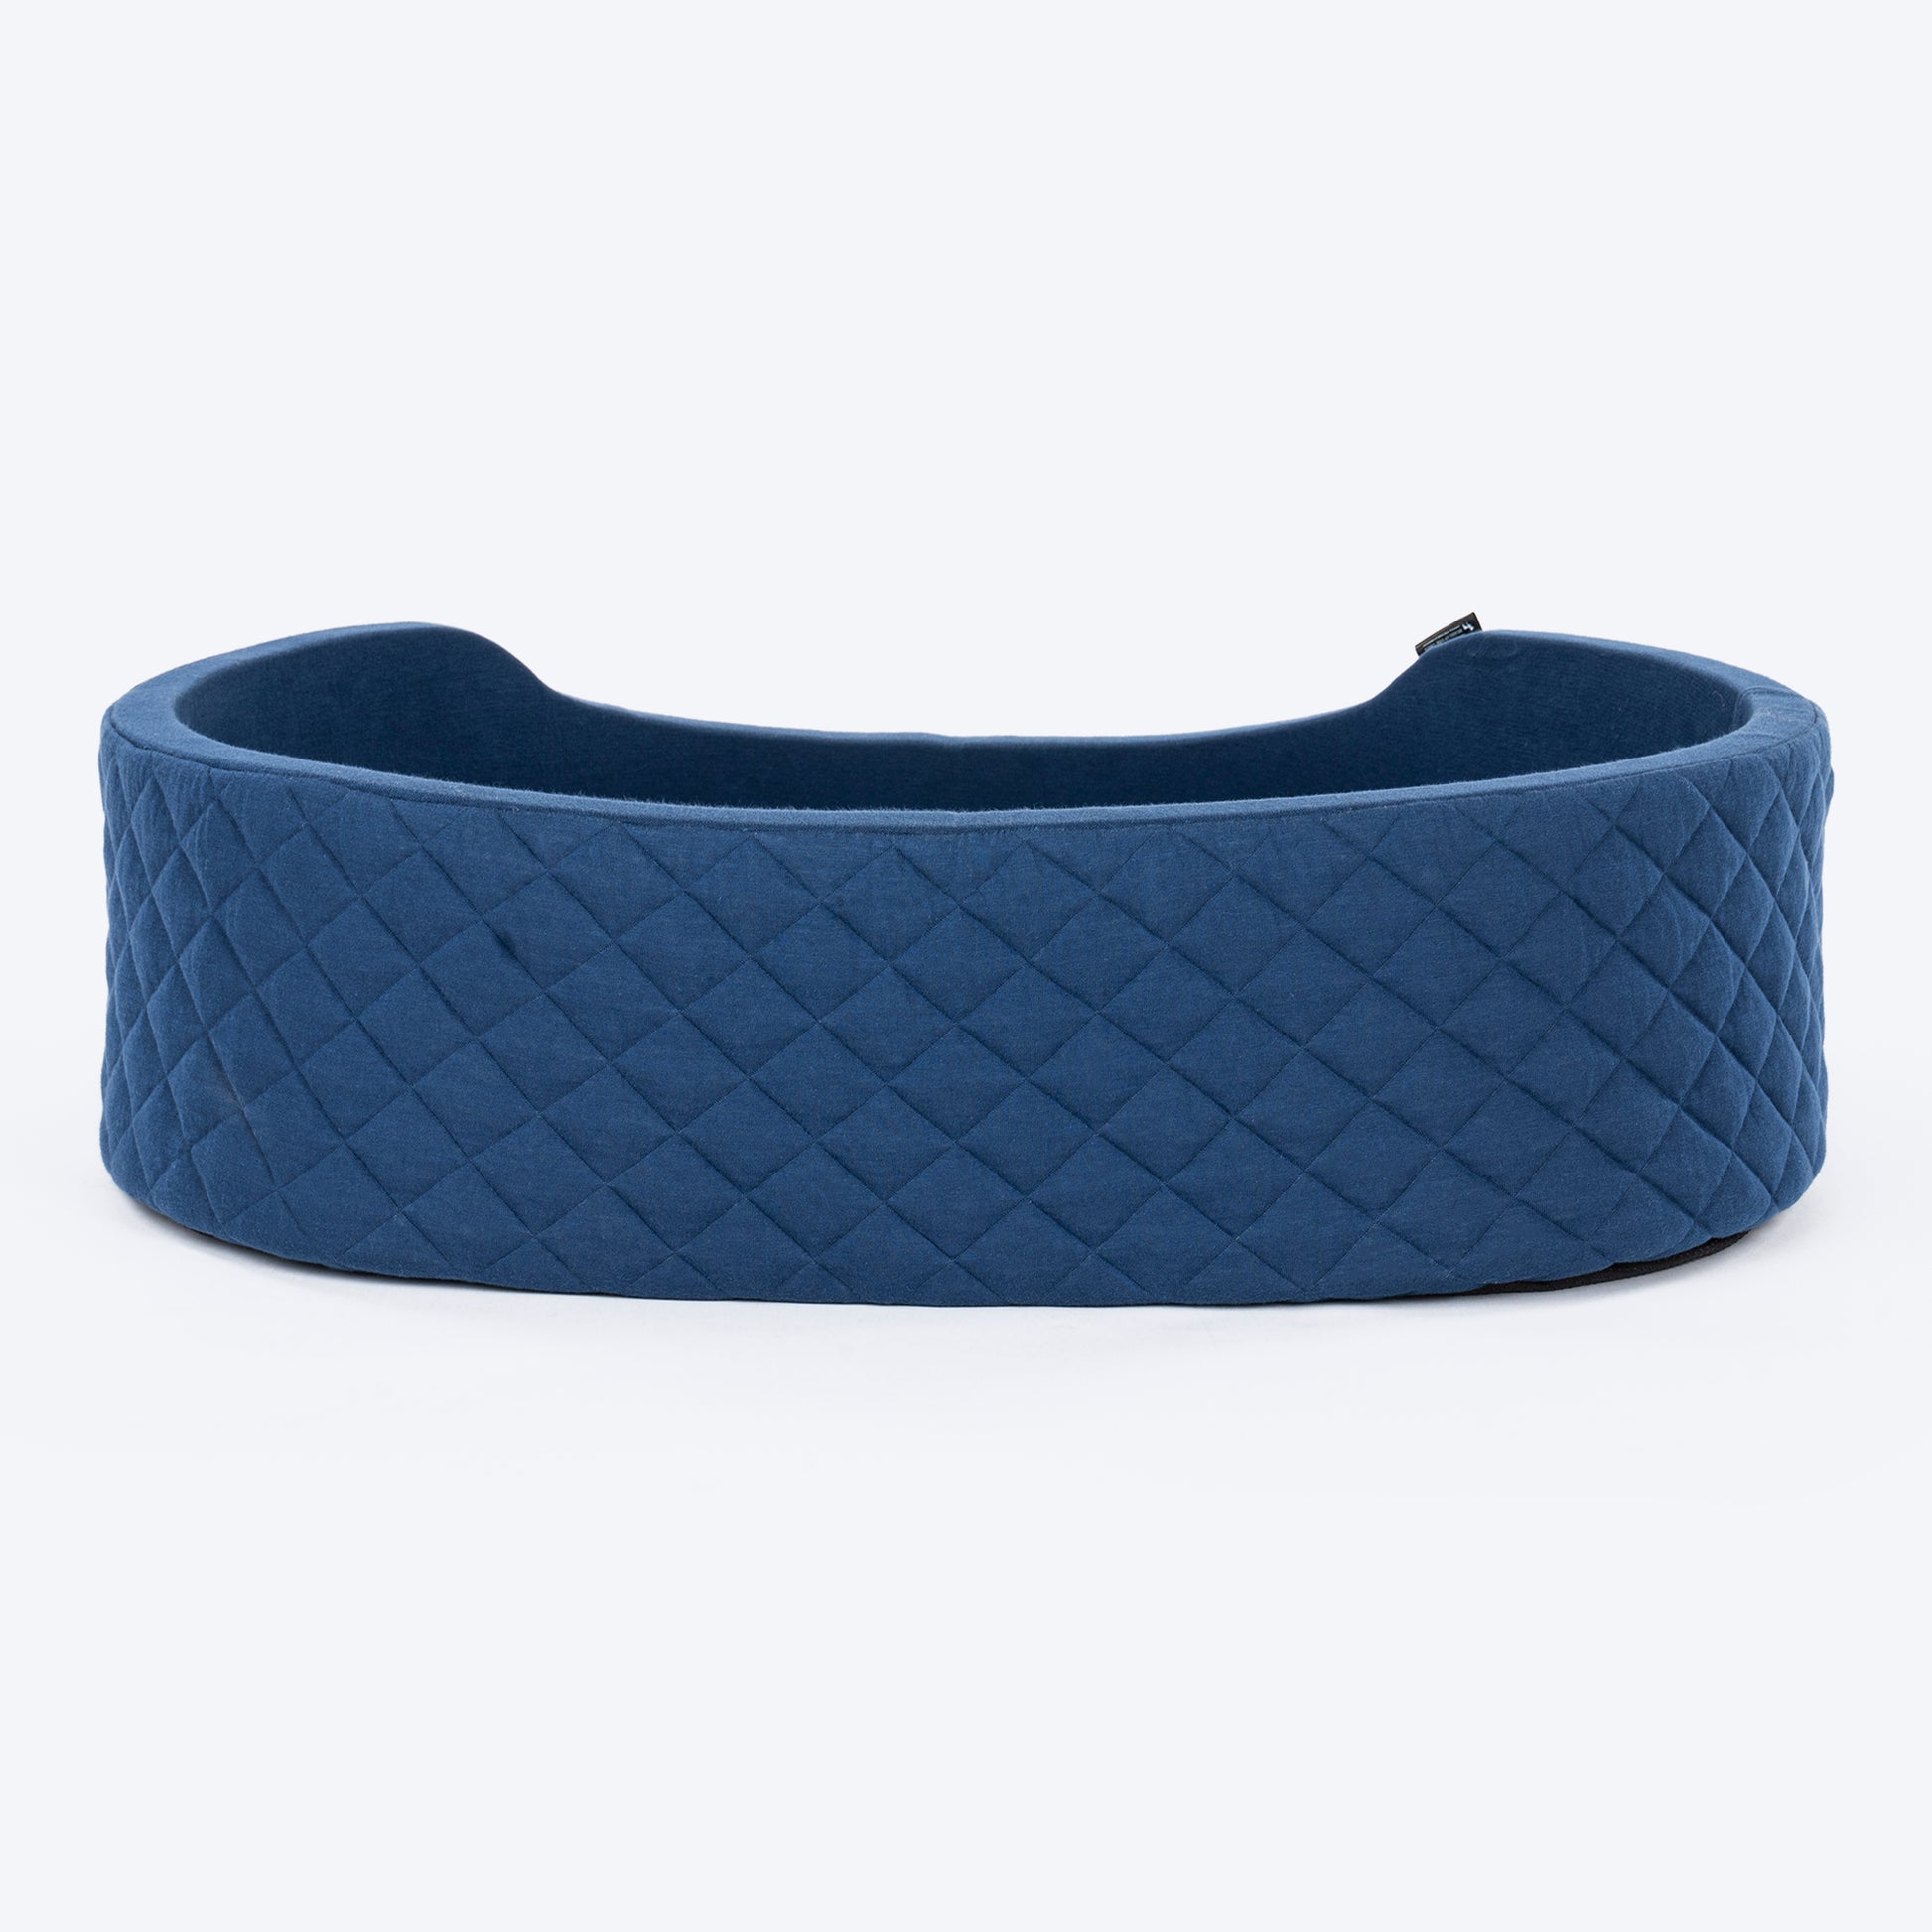 HUFT Quilted Basket Pet Bed - Egyptian Blue - Heads Up For Tails